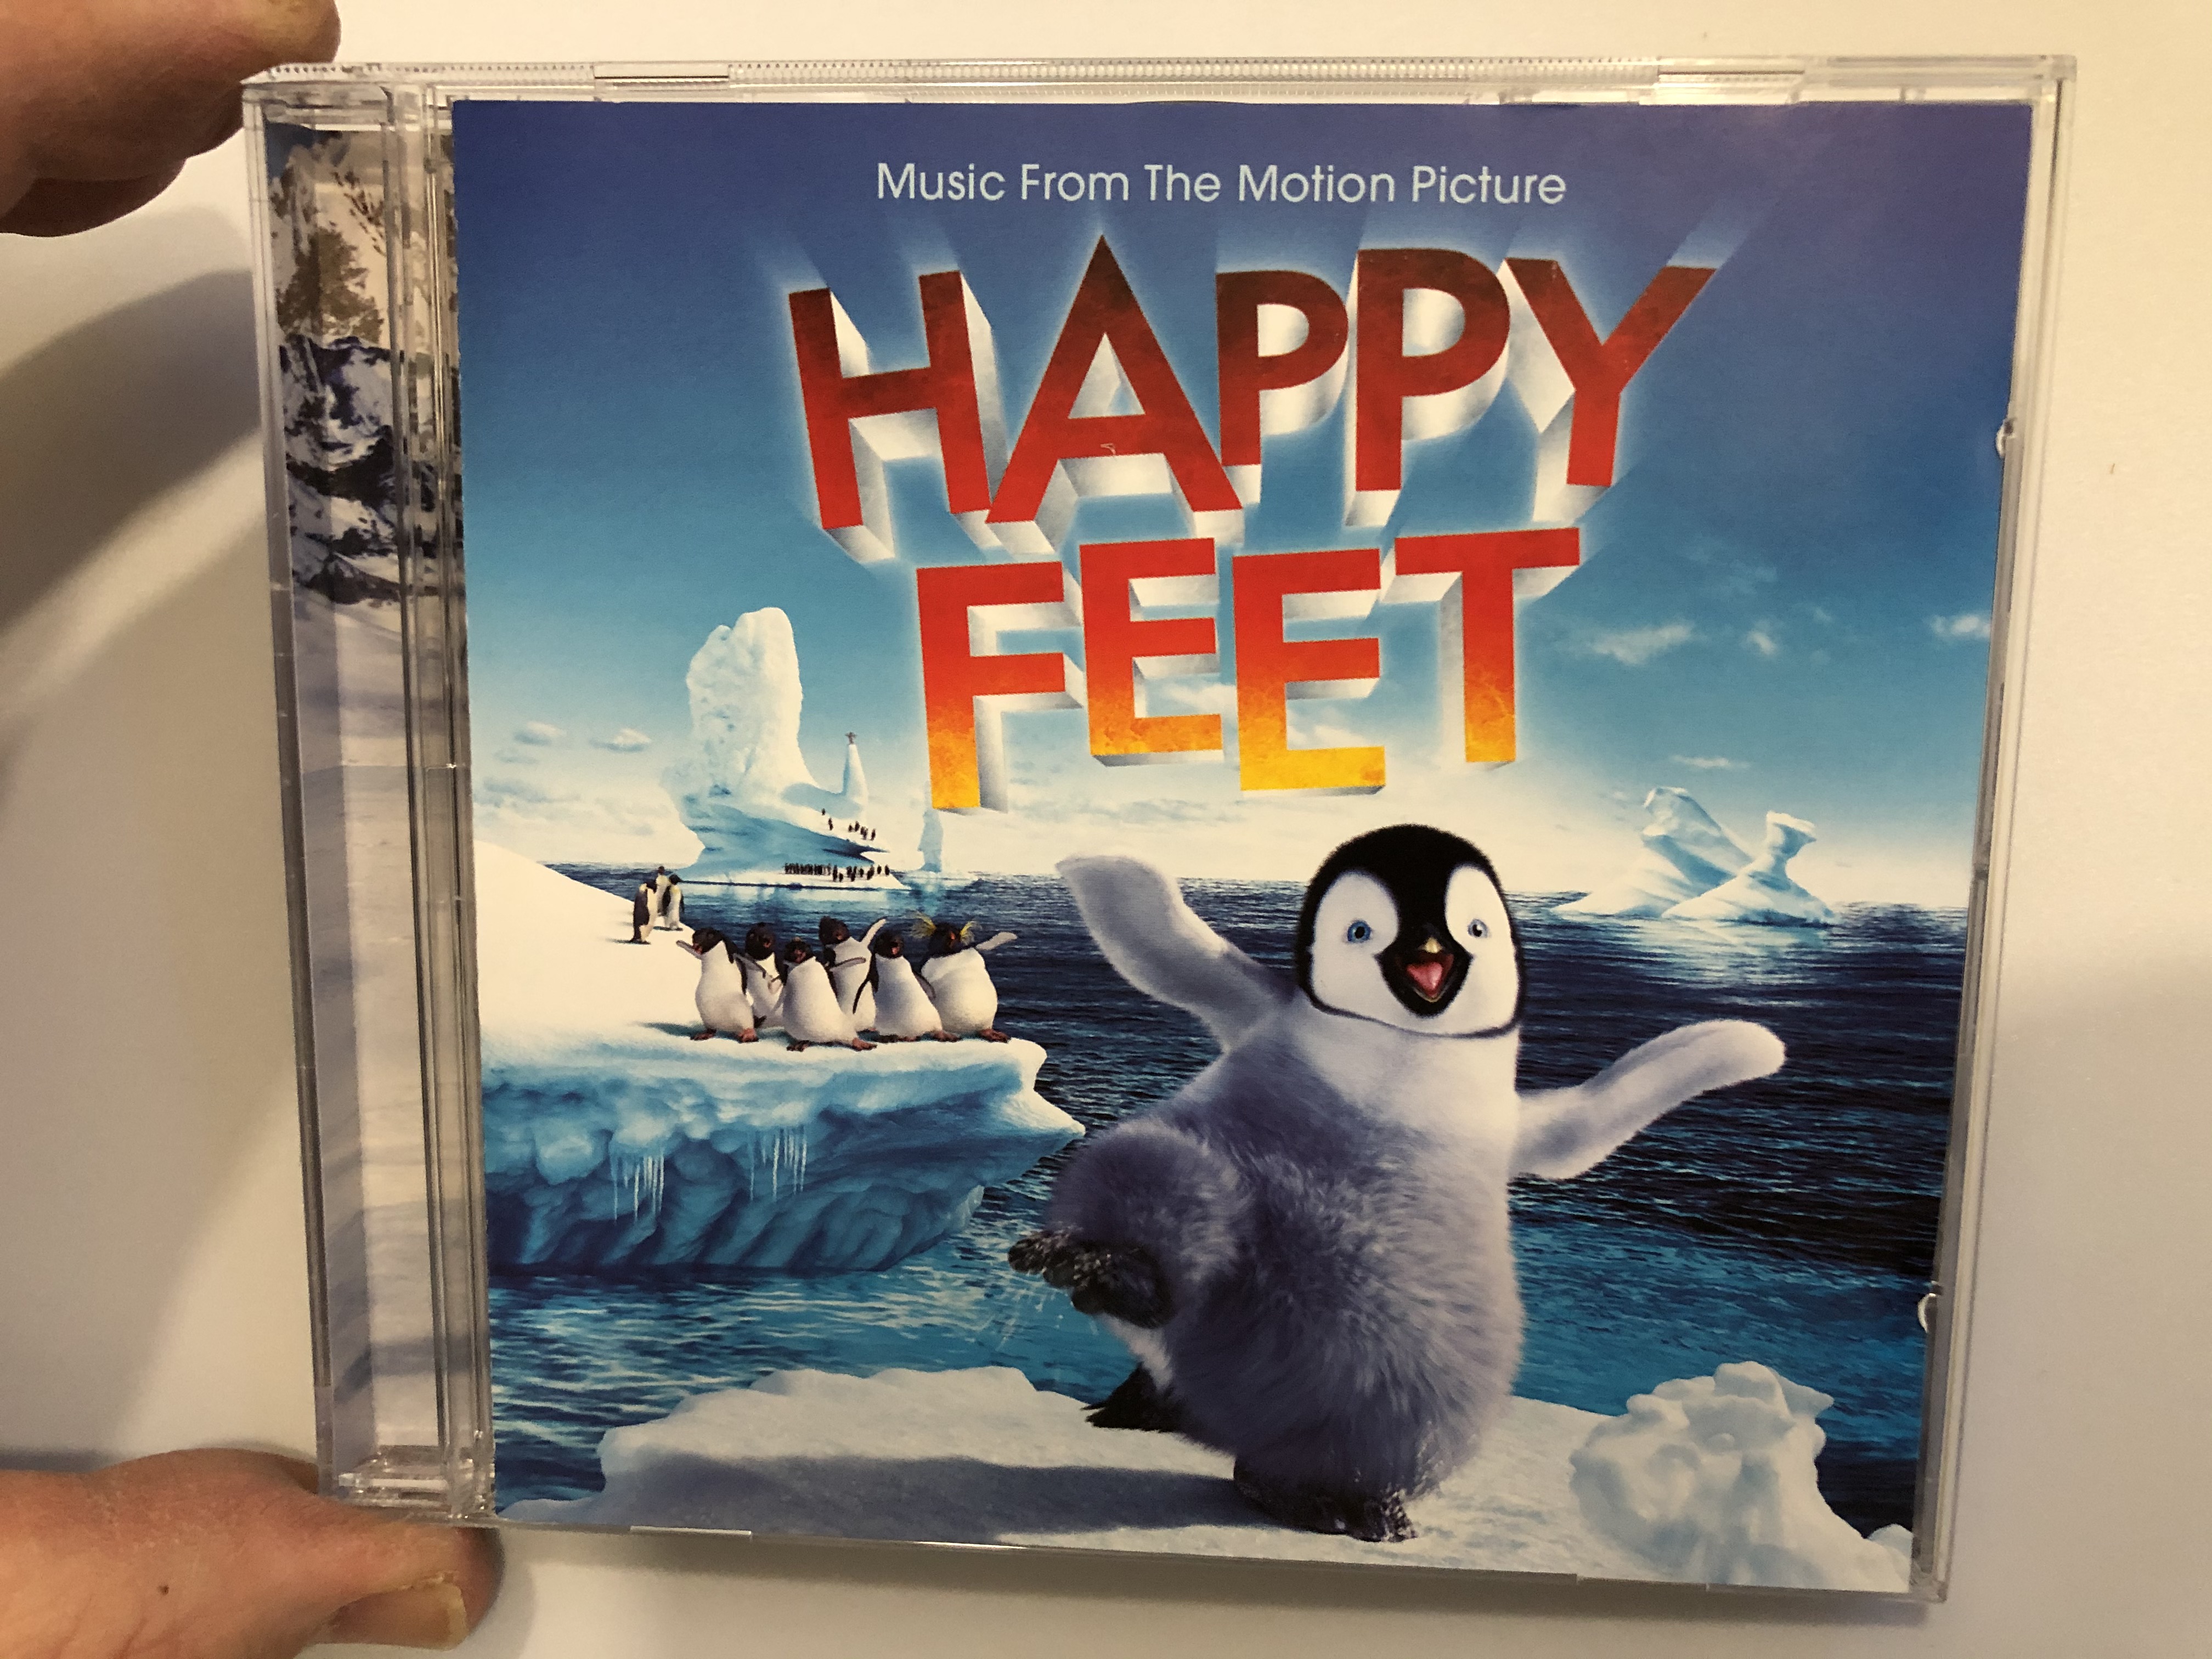 music-from-the-motion-picture-happy-feet-warner-music-group-audio-cd-2006-7567-83998-2-1-.jpg